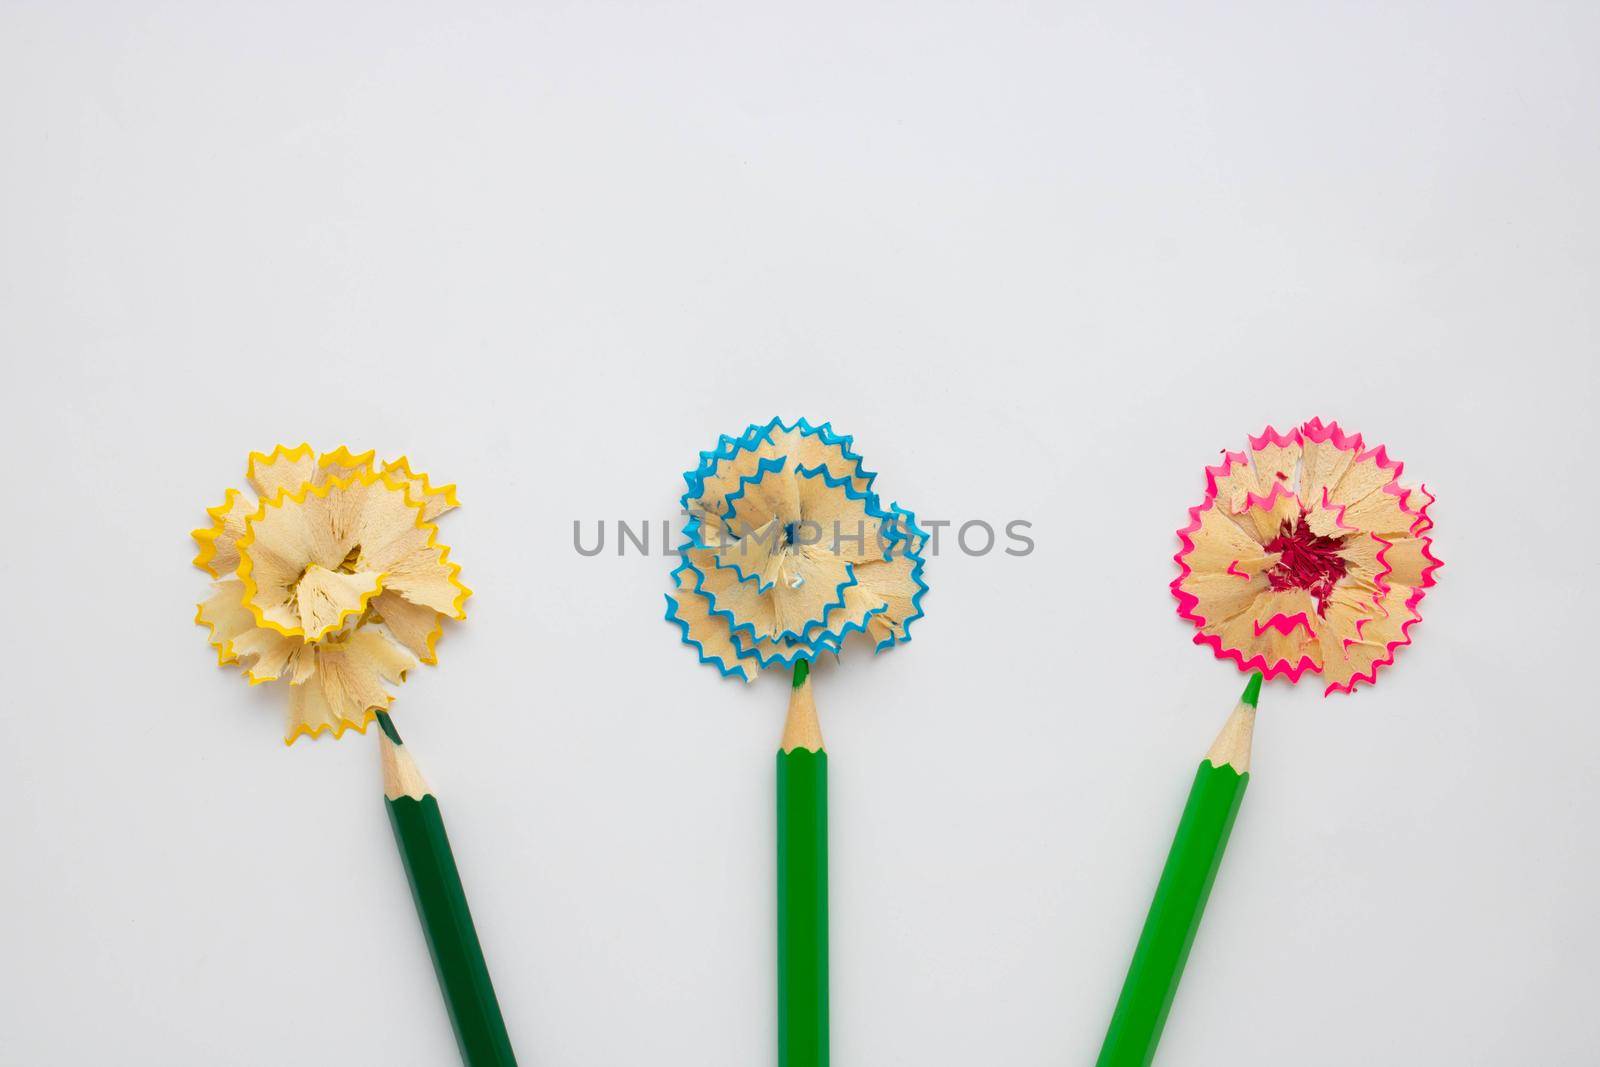 Colored wooden pencils, shavings lined with flowers, isolated on a white background. Old wooden pencils with garbage, shavings